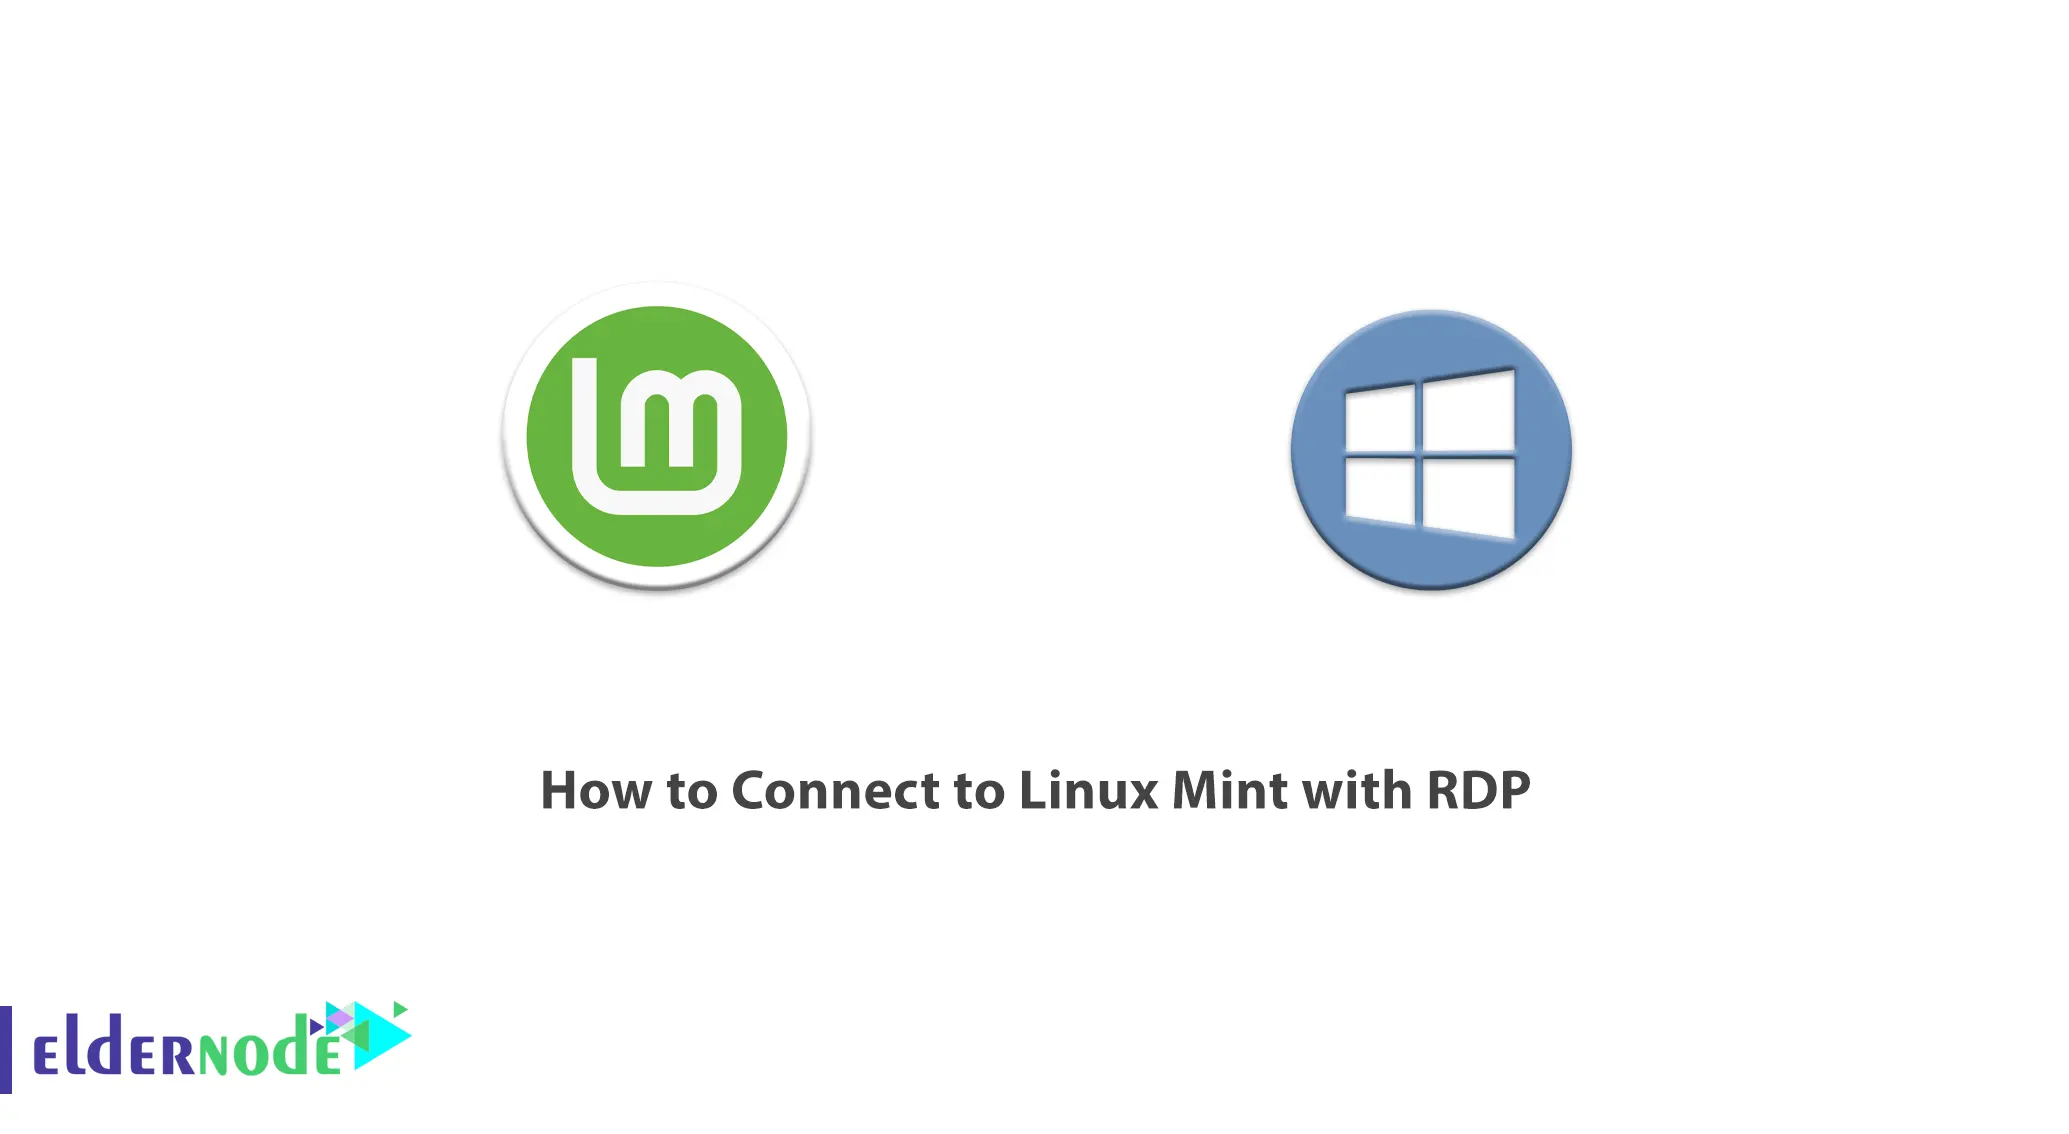 How to Connect to Linux Mint with RDP